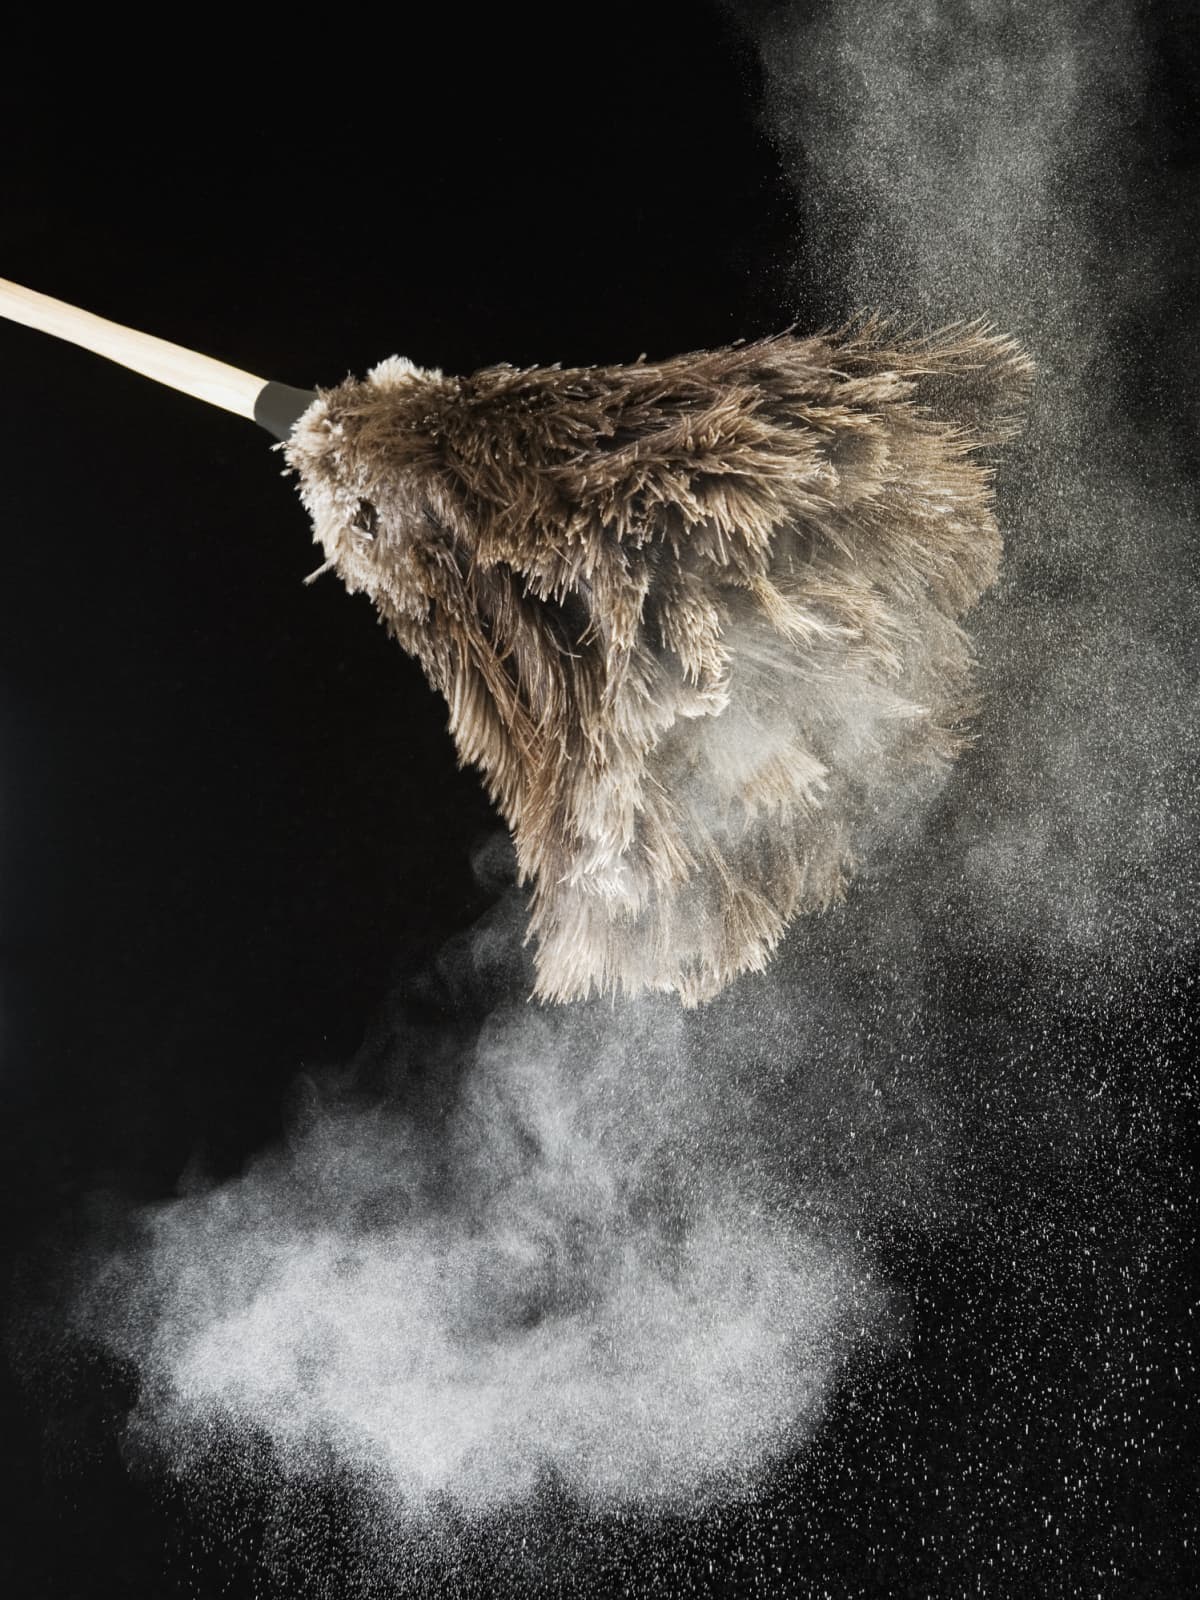 A duster in a cloud of dust